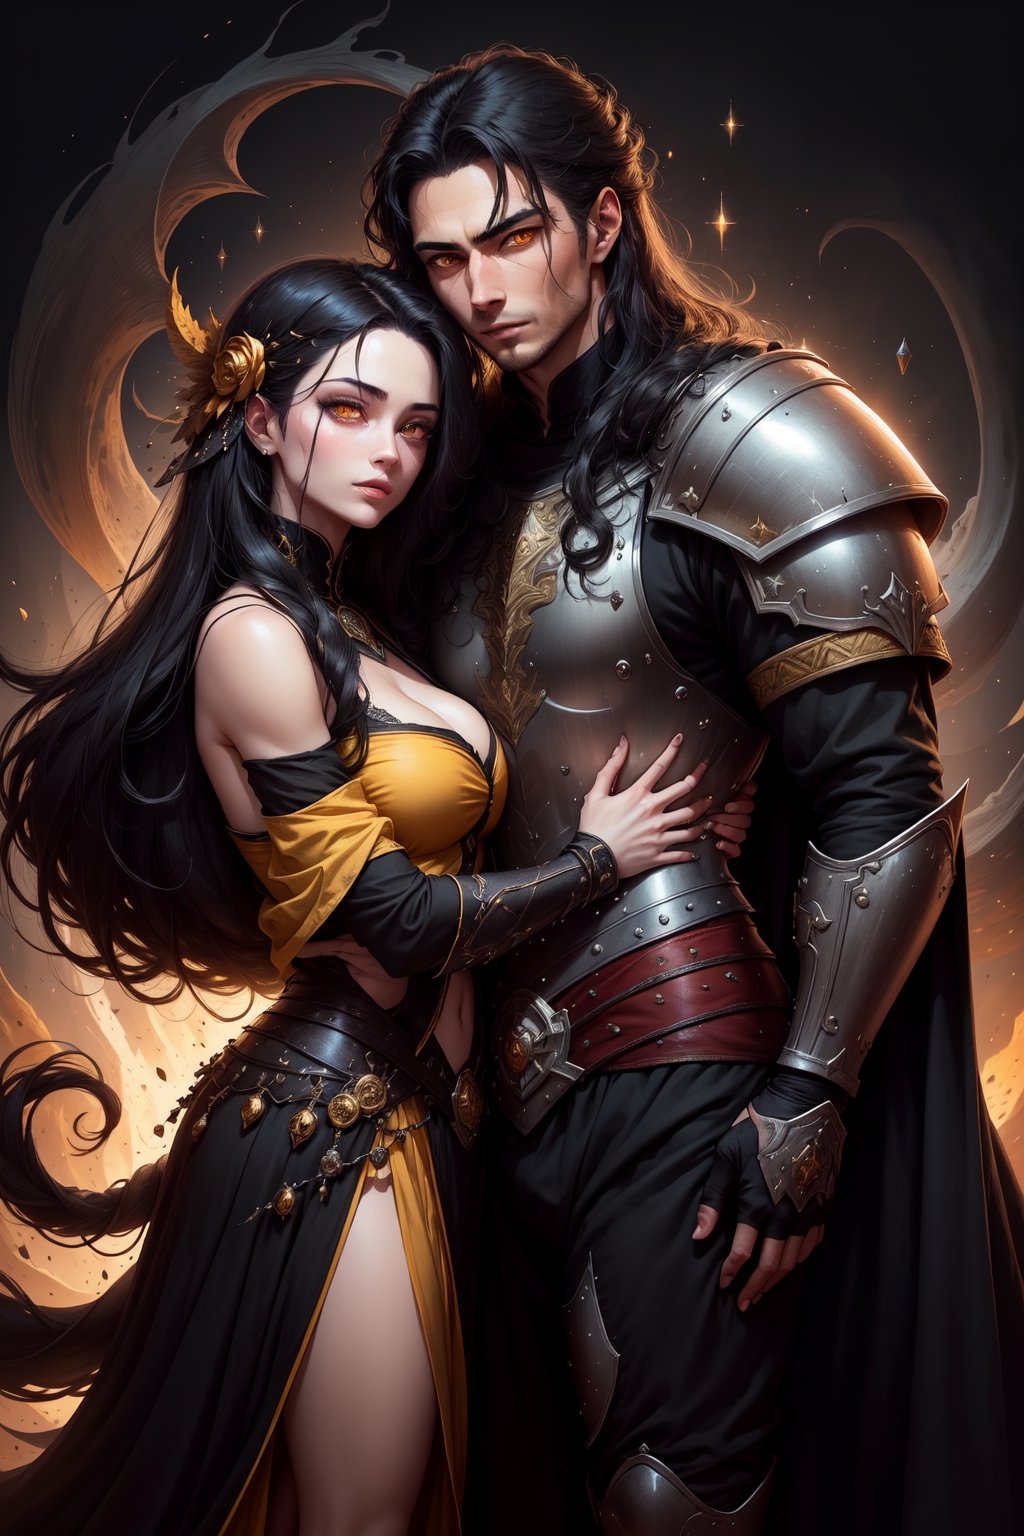 1man warrior, 1woman sorceress, long black hair colour, yellow eye, sparkling pupils, armour, robes, handsome, lovers embrace, simple background, (ultra clear image), autonomy figure, (high definition), proper body formation. correct body posture,
